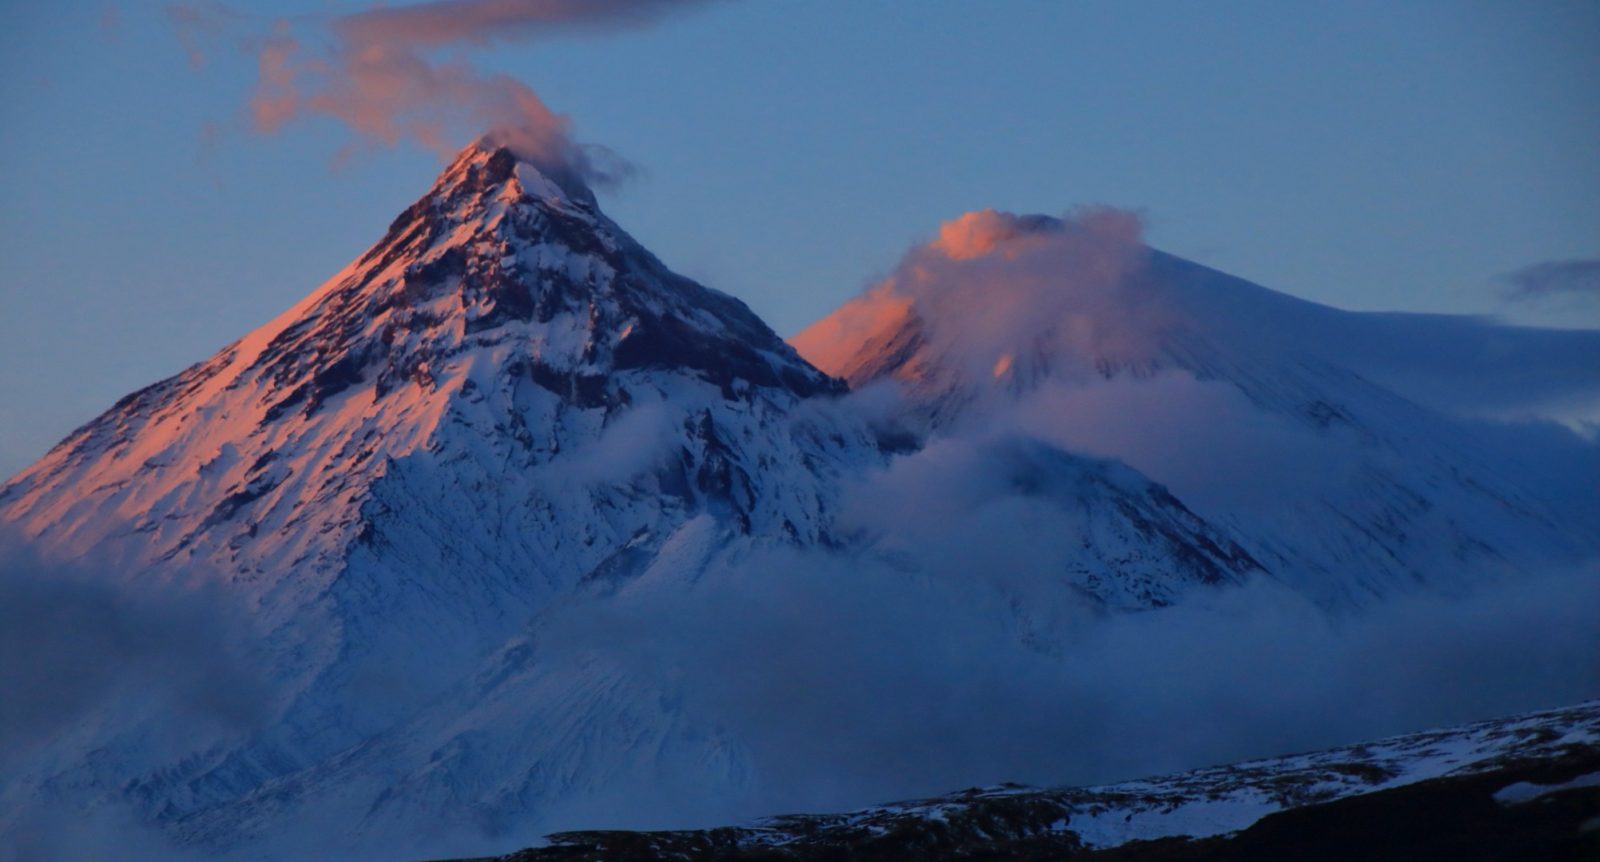 Volcanos in Kamchatka as shot on Secret Compass expedition by Cheryl Hindle